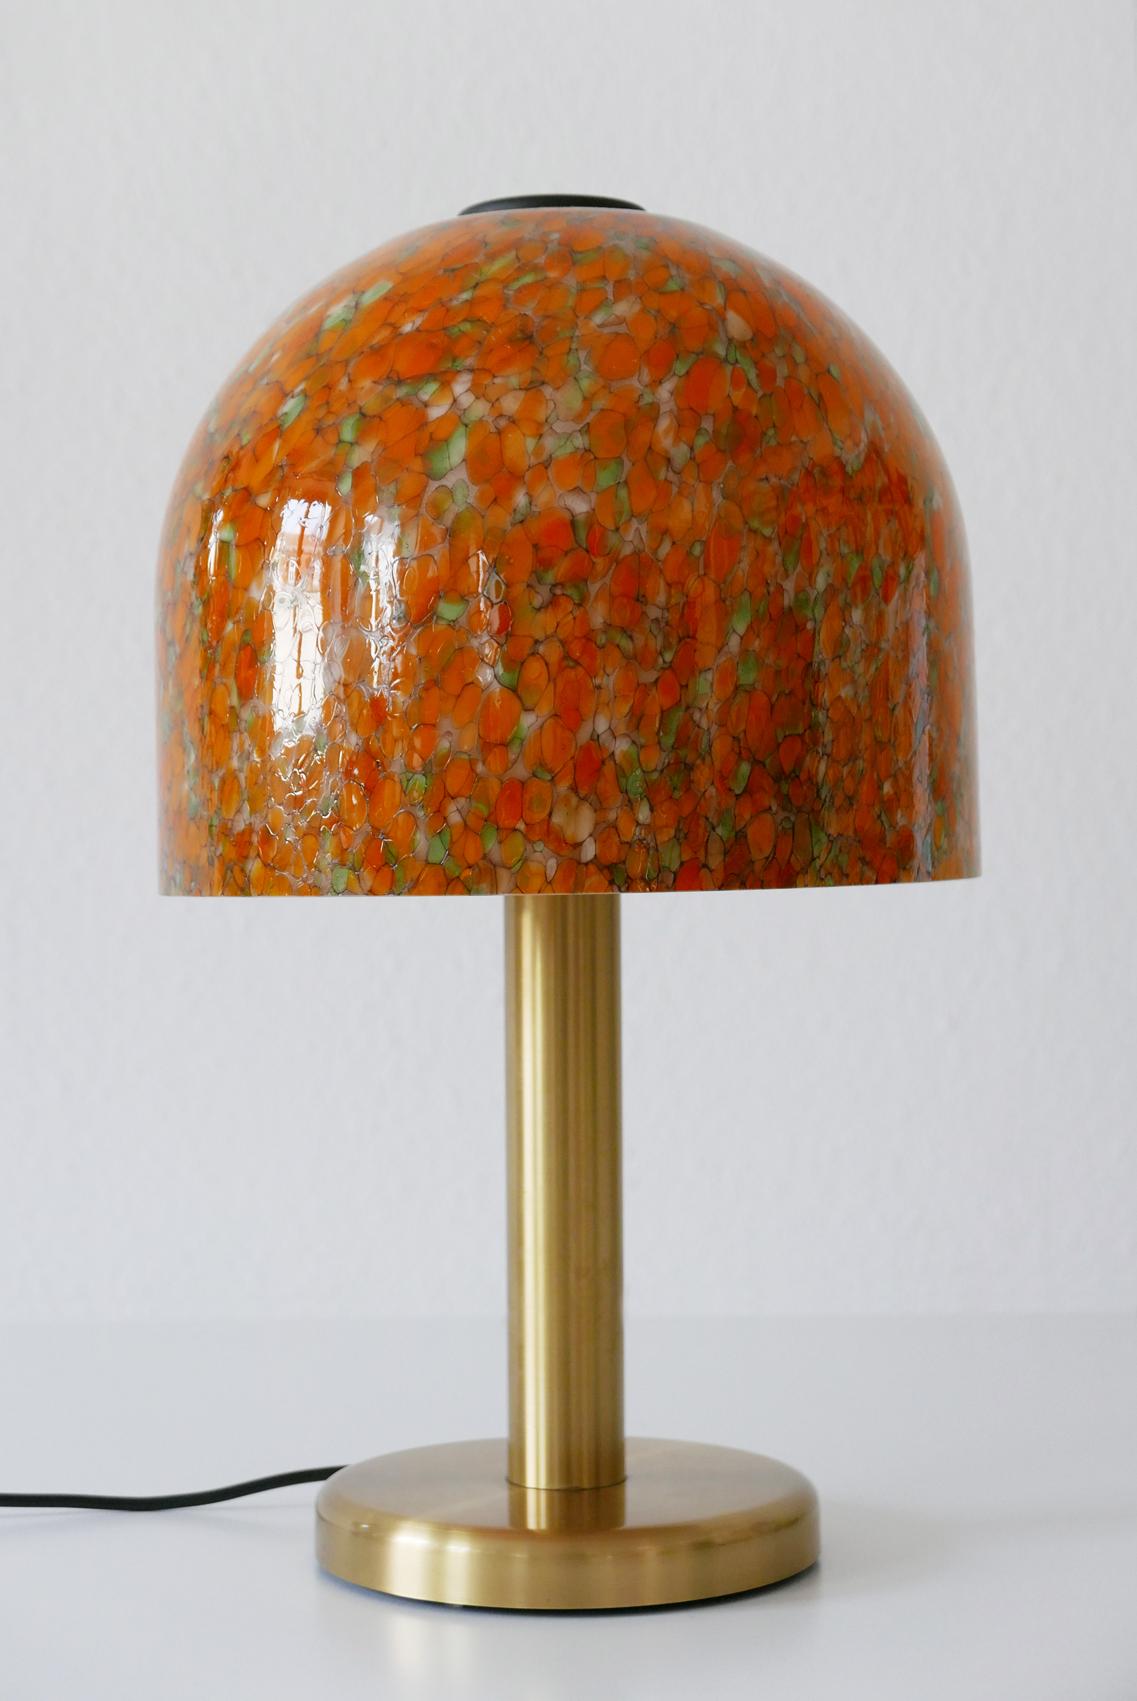 Rare and elegant Mid-Century Modern table lamp by Peill & Putzler, Germany, 1970s.

Executed in glass and brass. The lamp needs 1 x E27 Edison screw fit bulb, is with original wiring, and in working condition. It runs both on 110 / 230